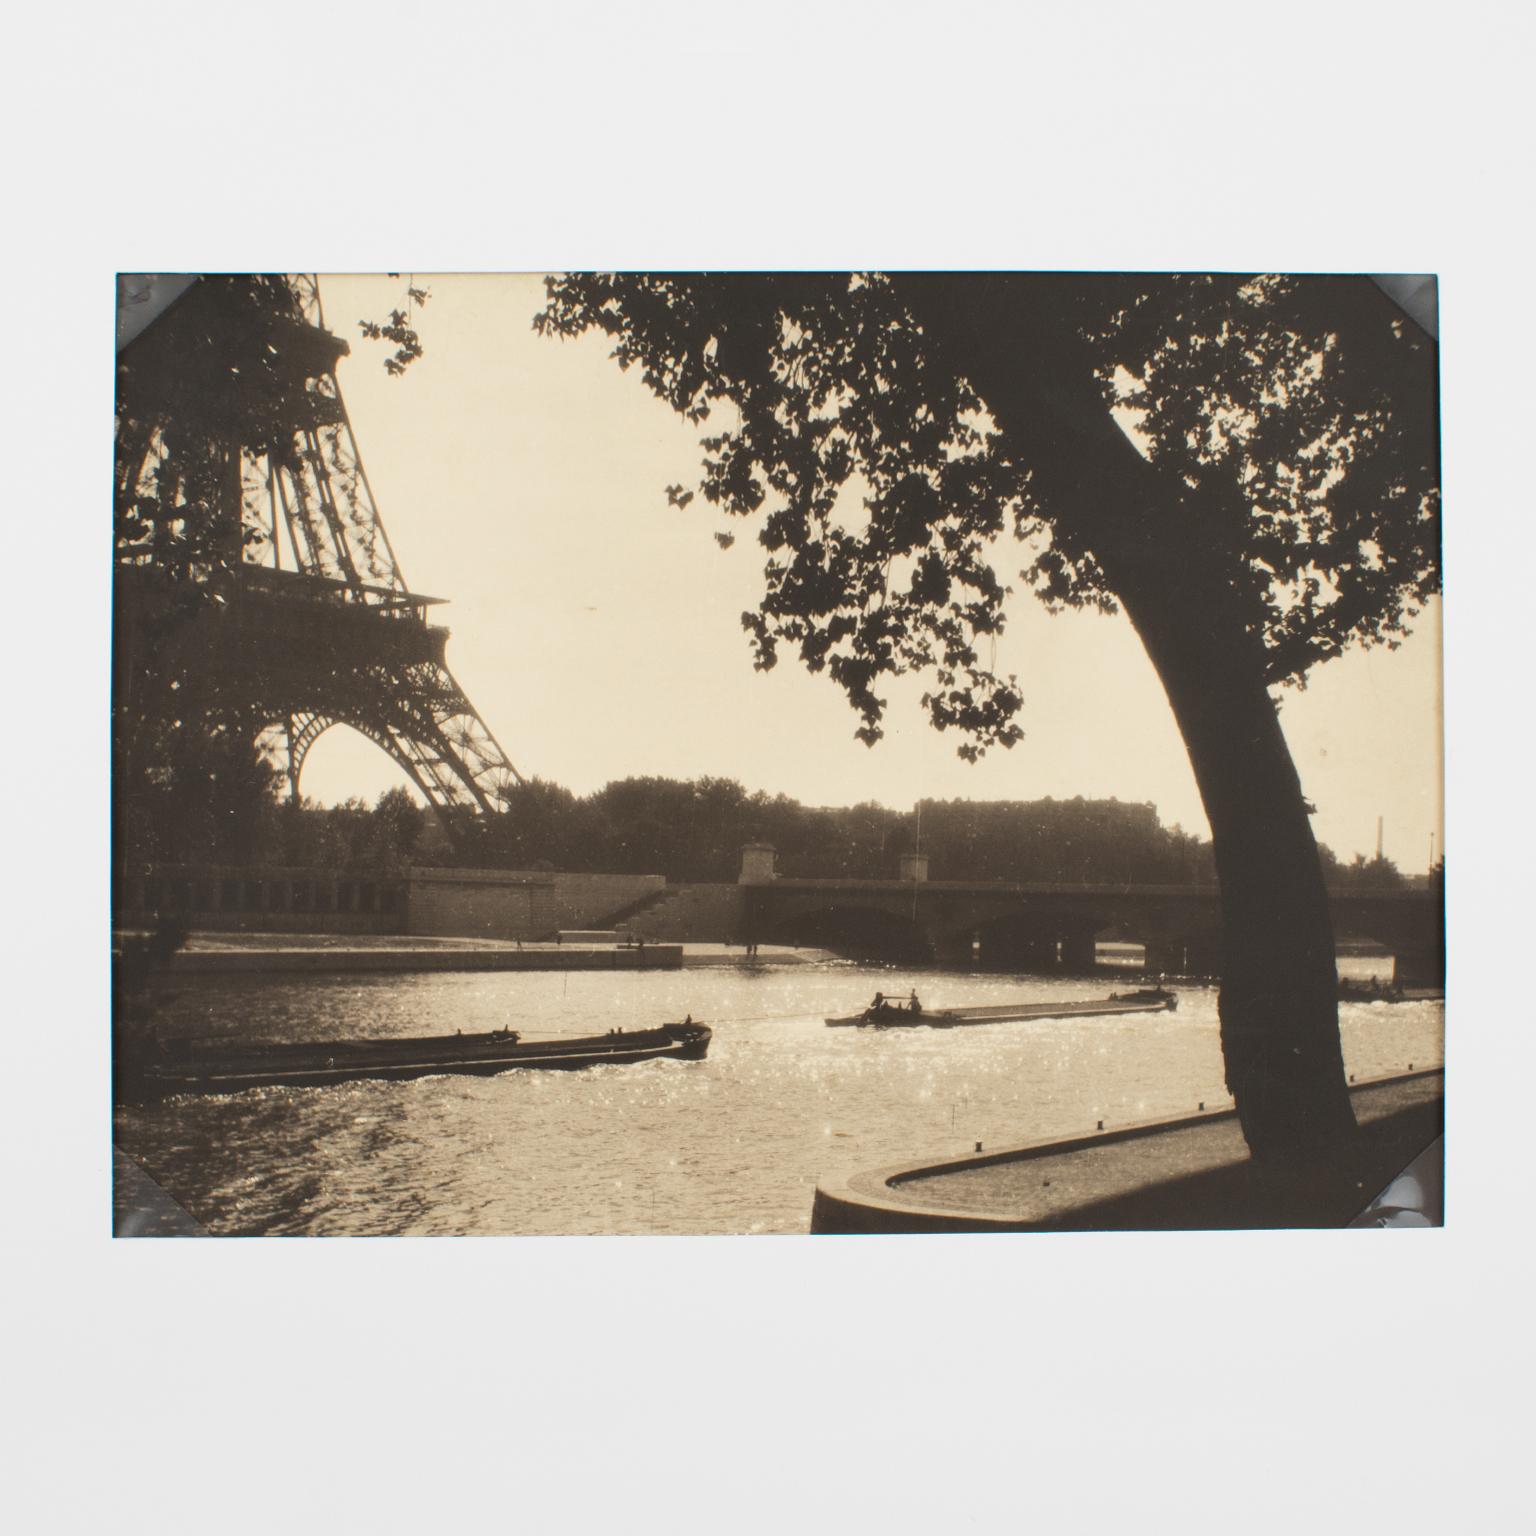 An original silver gelatin black and white photograph. Paris, the River Seine, and the Eiffel Tower, circa 1940.
Features:
Original silver gelatin print photography unframed.
Press photography.
Press agency: anonymous.
Photographer: